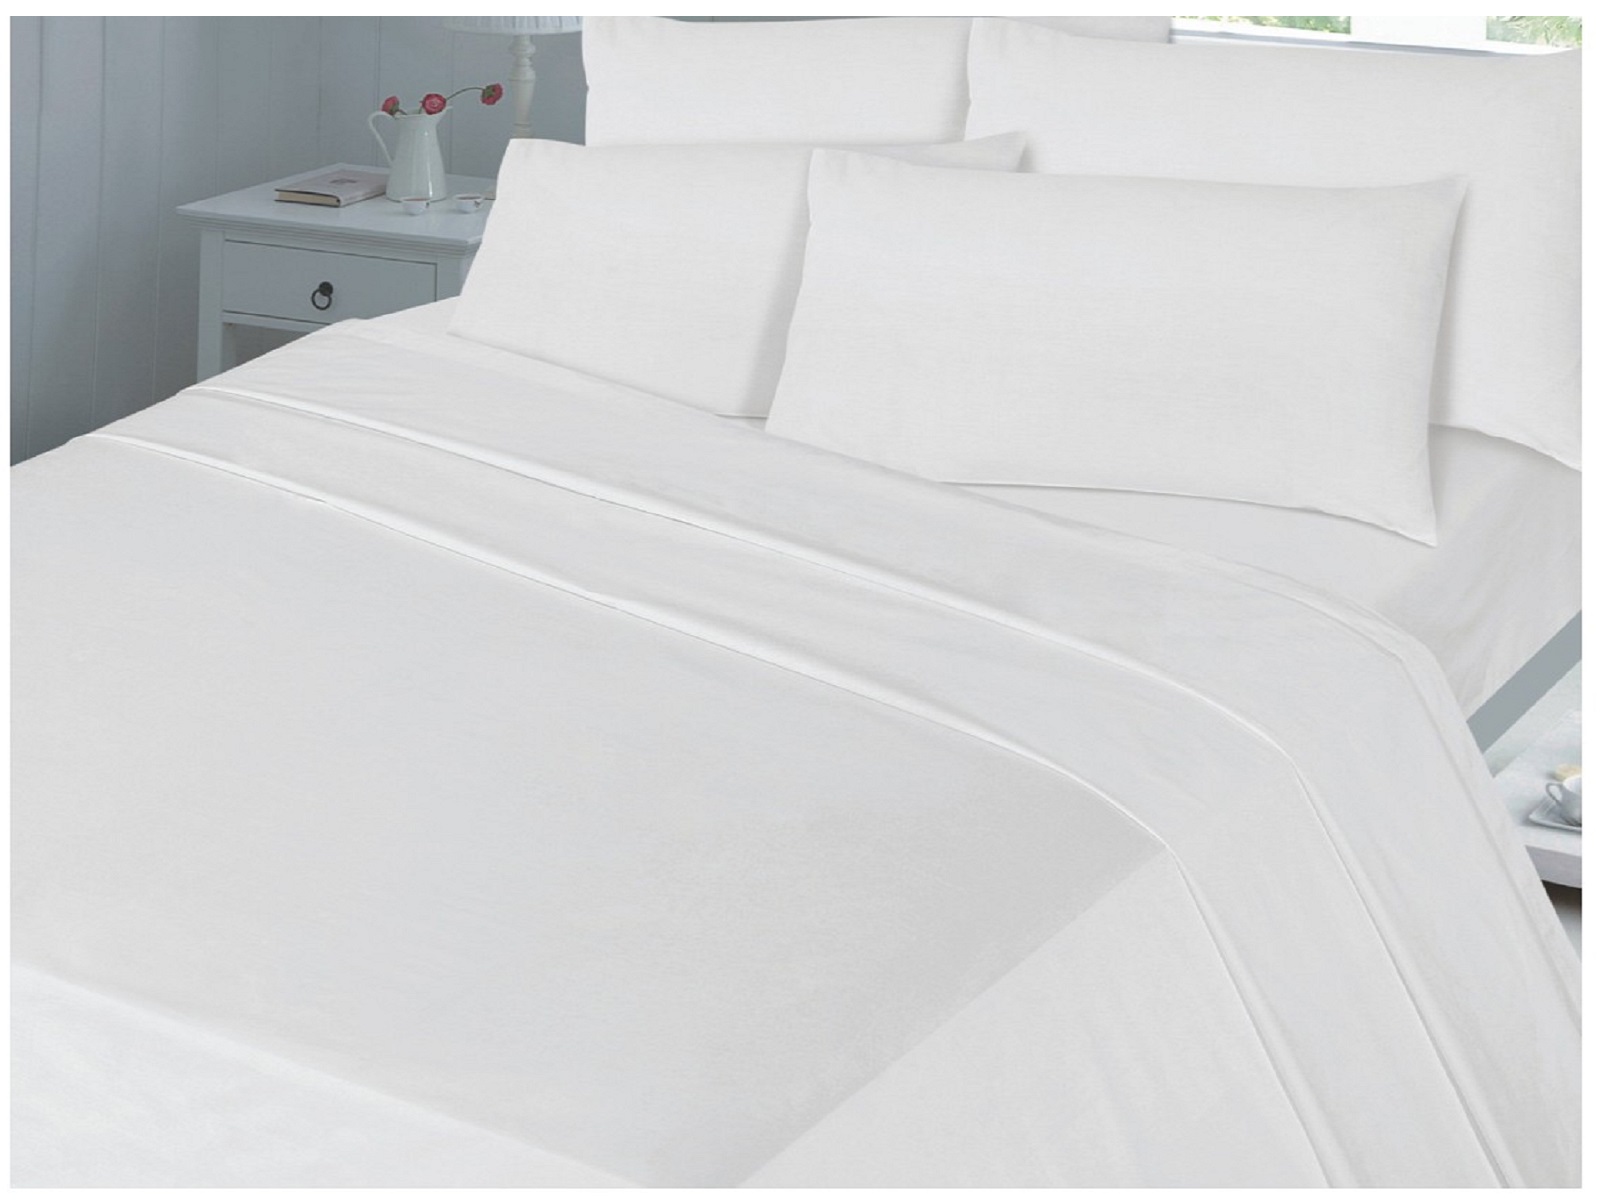 400TC FLAT SHEET 100% EGYPTIAN COTTON HOTEL QUALITY TOP SHEETS ALL SIZES WHITE 